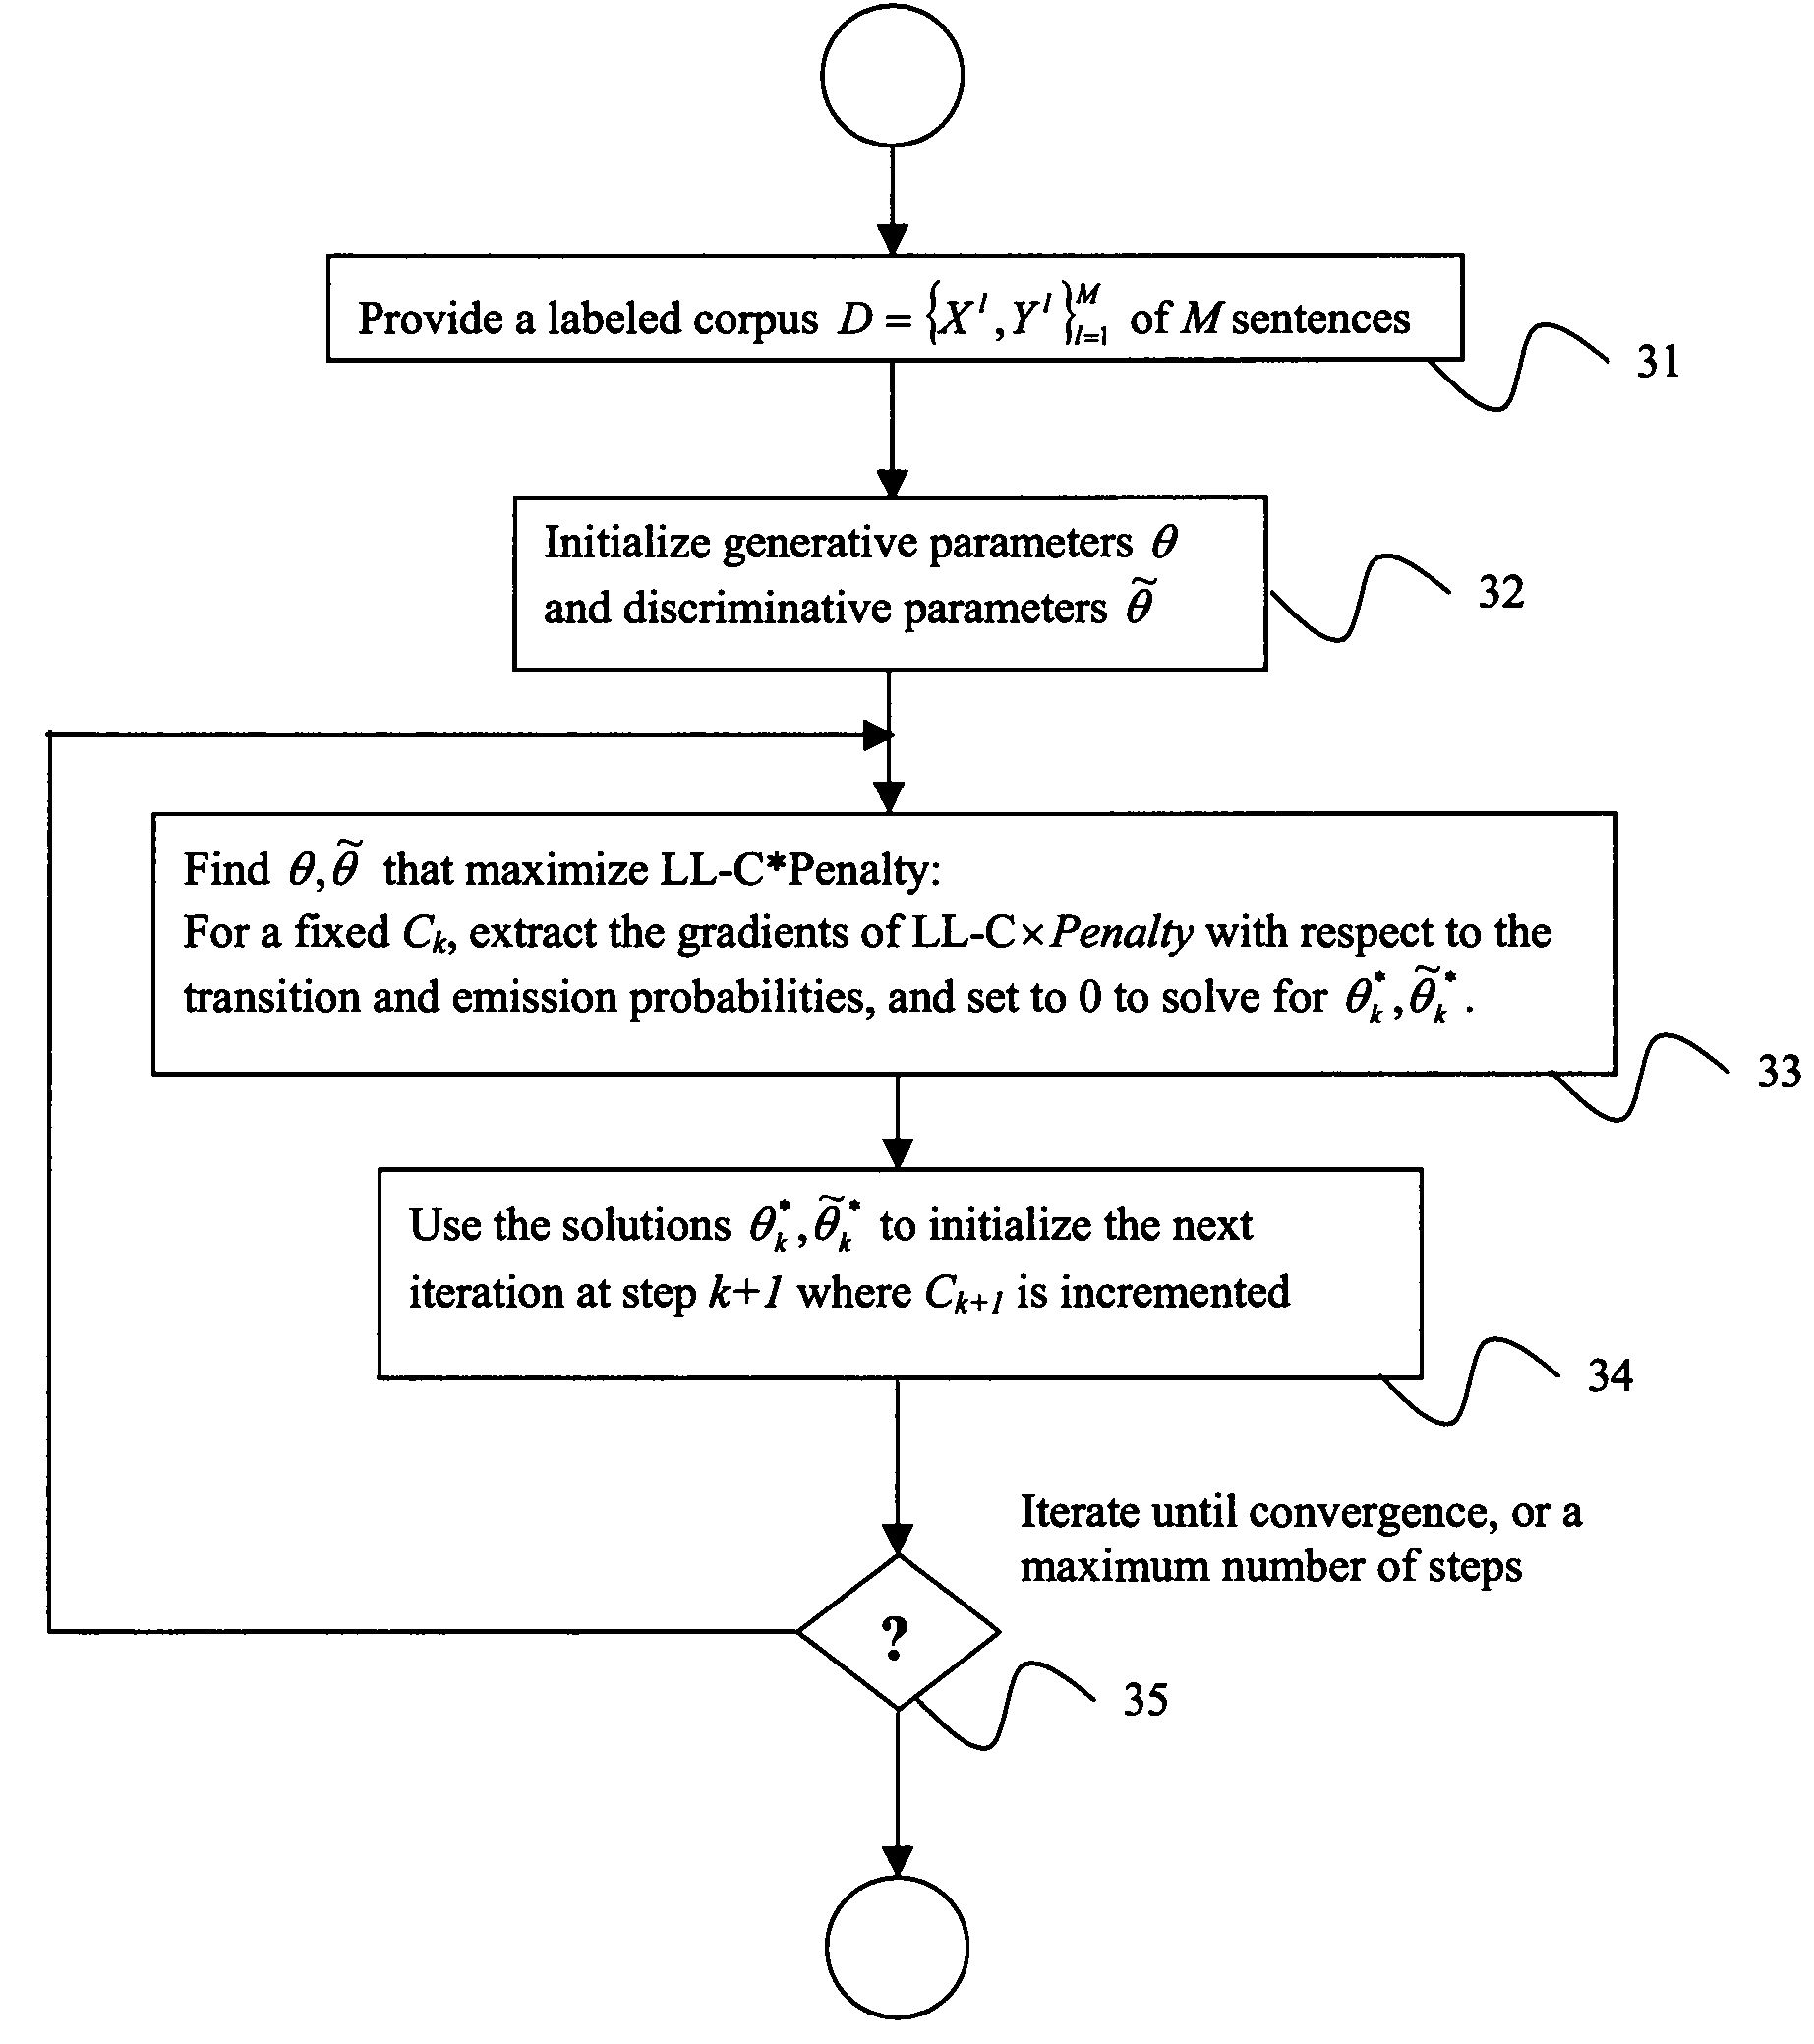 System and Method for Text Tagging and Segmentation Using a Generative/Discriminative Hybrid Hidden Markov Model